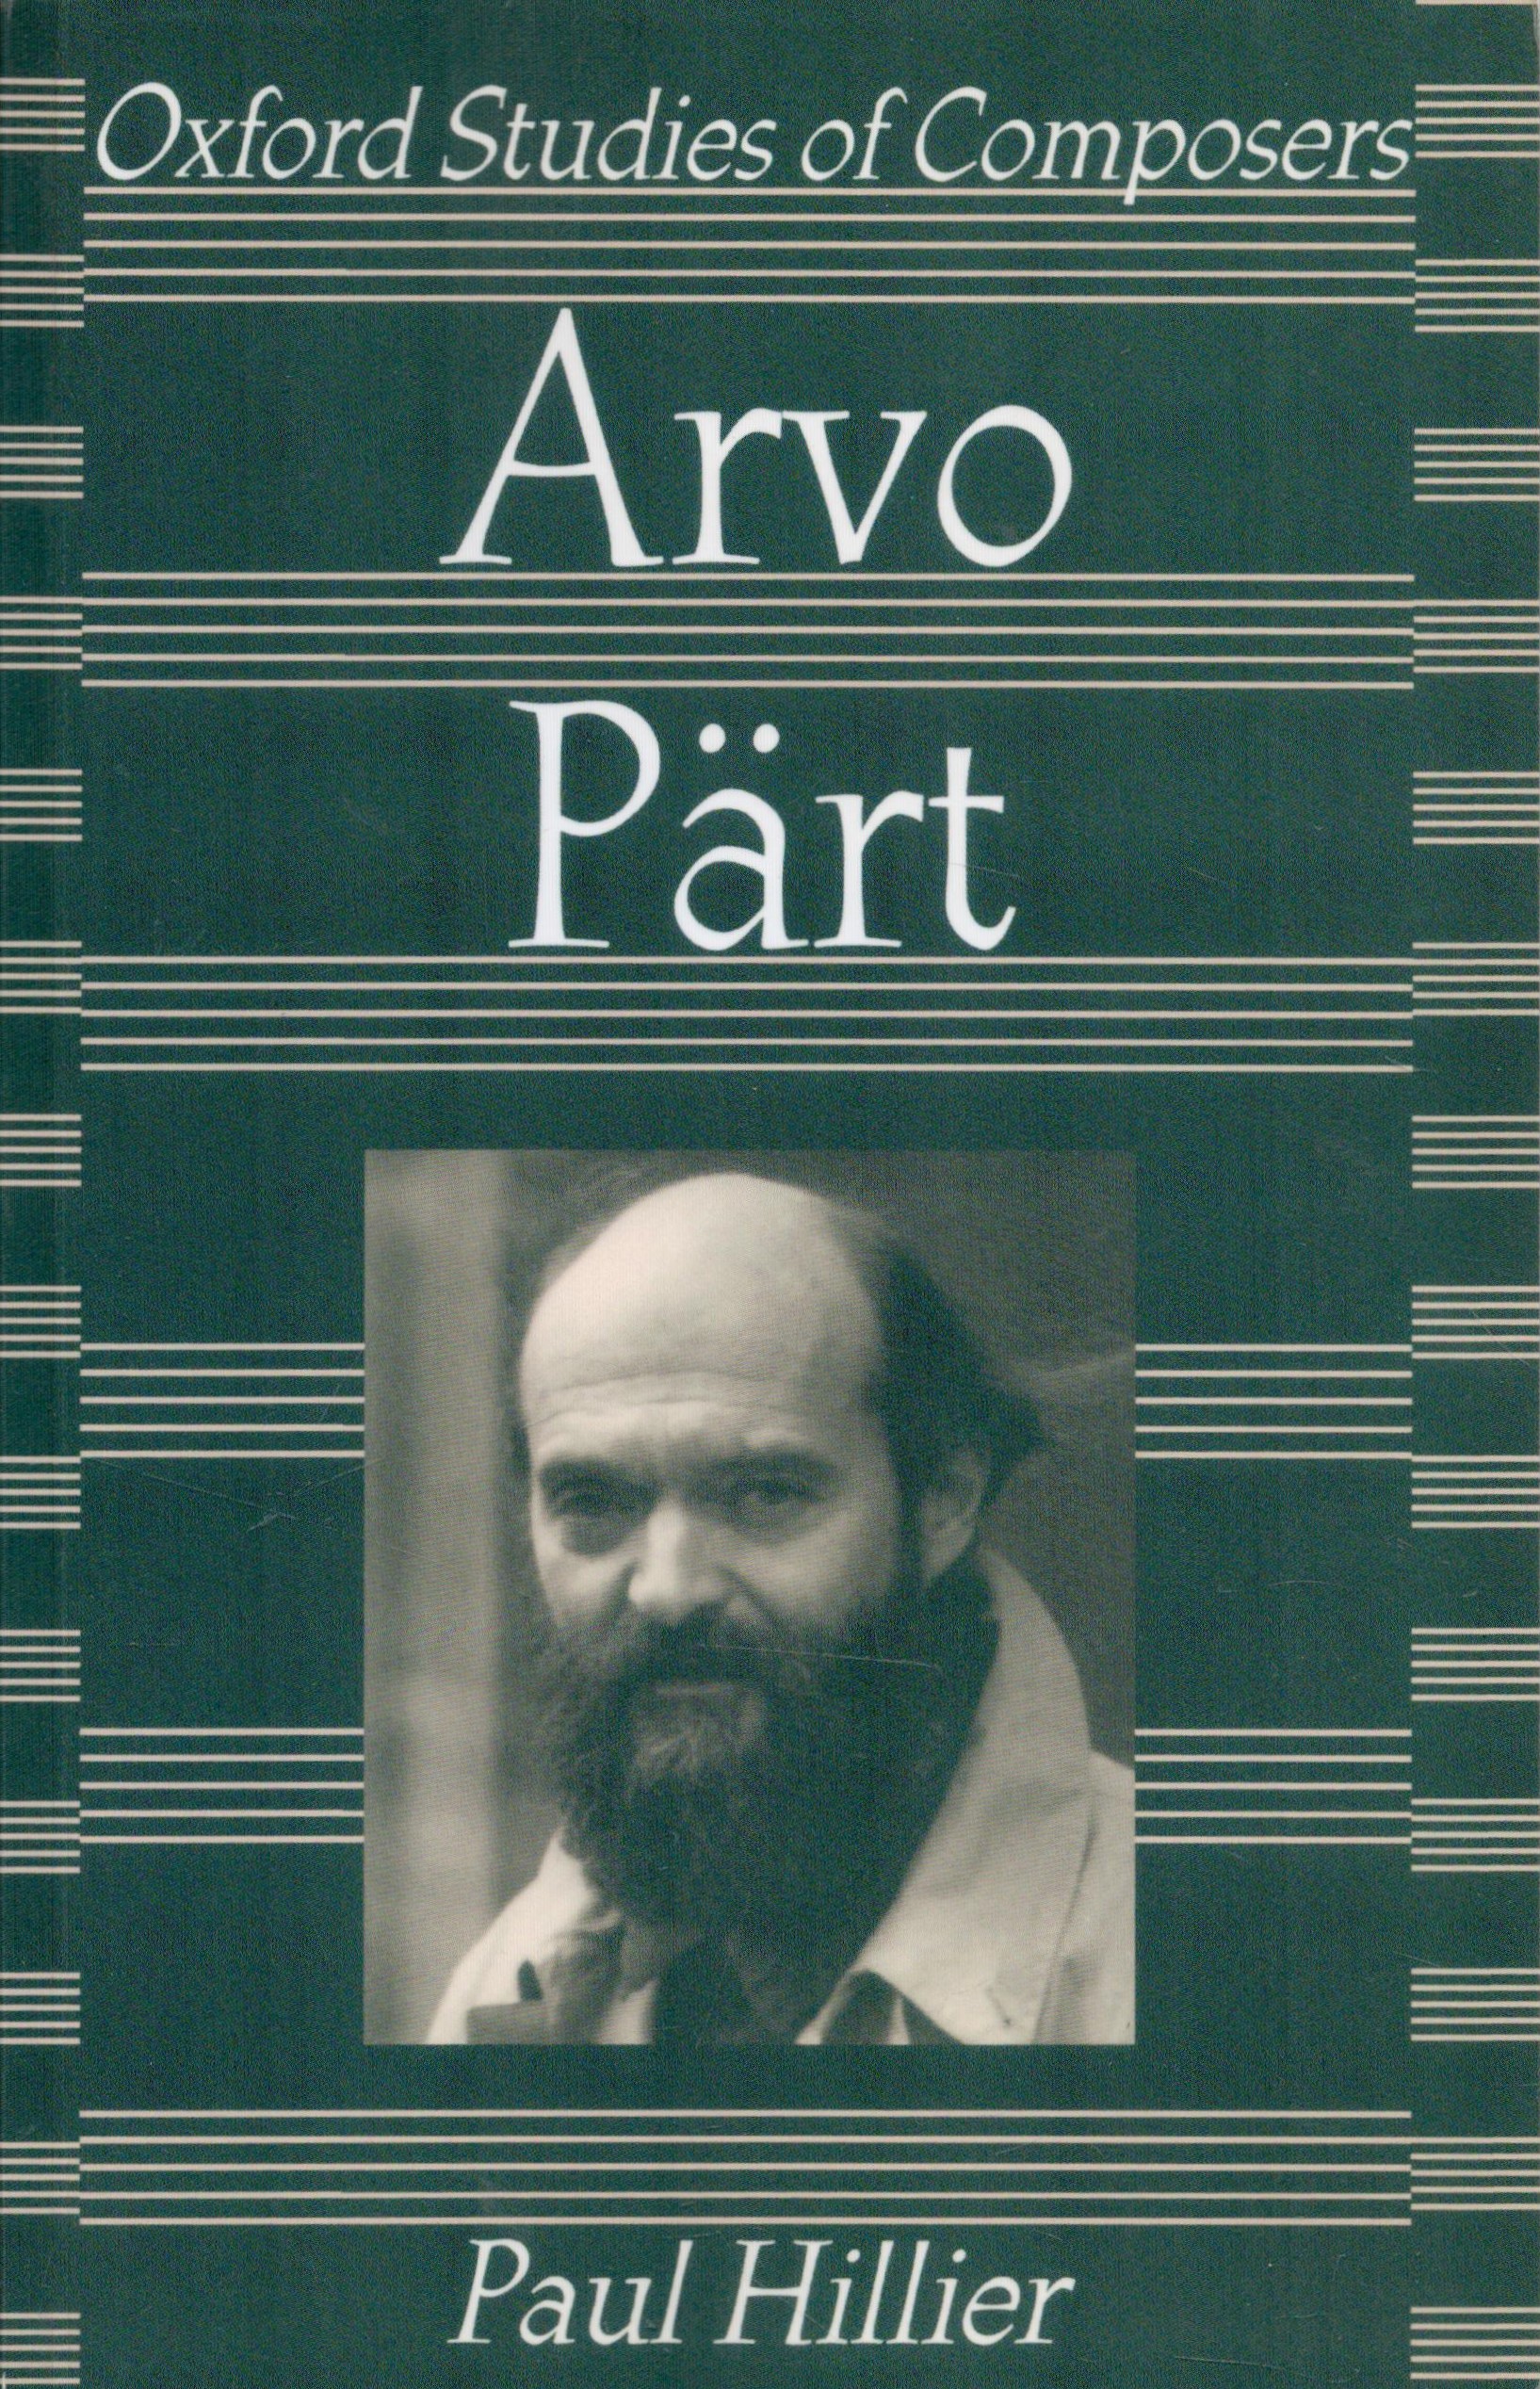 Oxford Studies of Composers Avro Part by Paul Hillier 1997 First Edition Softback Book with 219